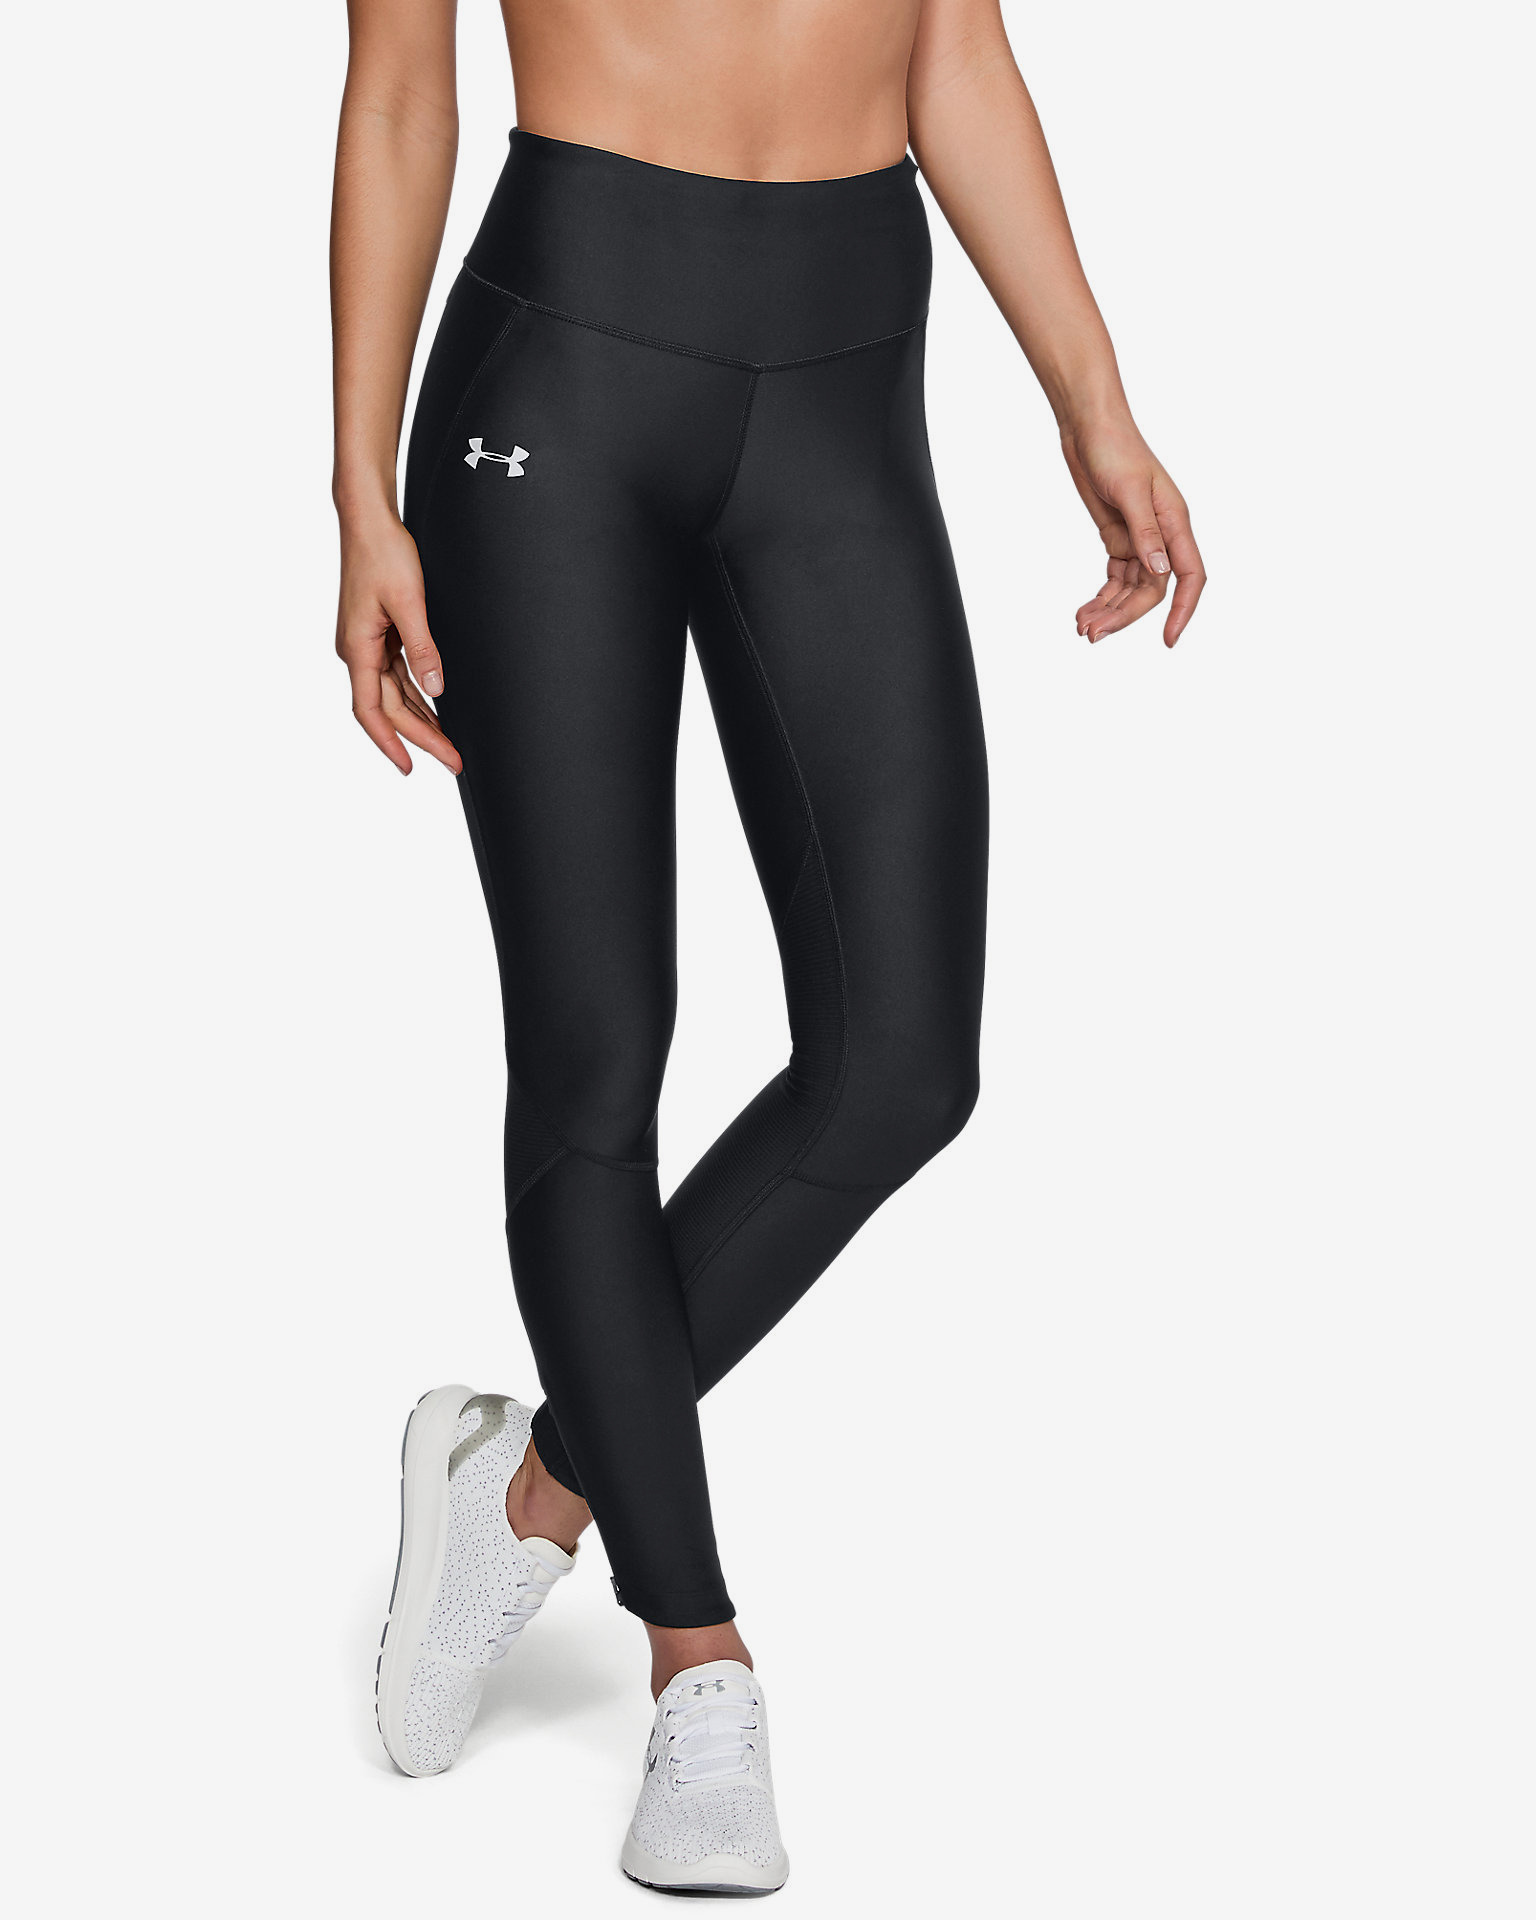 Under Armour Womens Fly Fast Mesh Panel Athletic Leggings,Black,Large